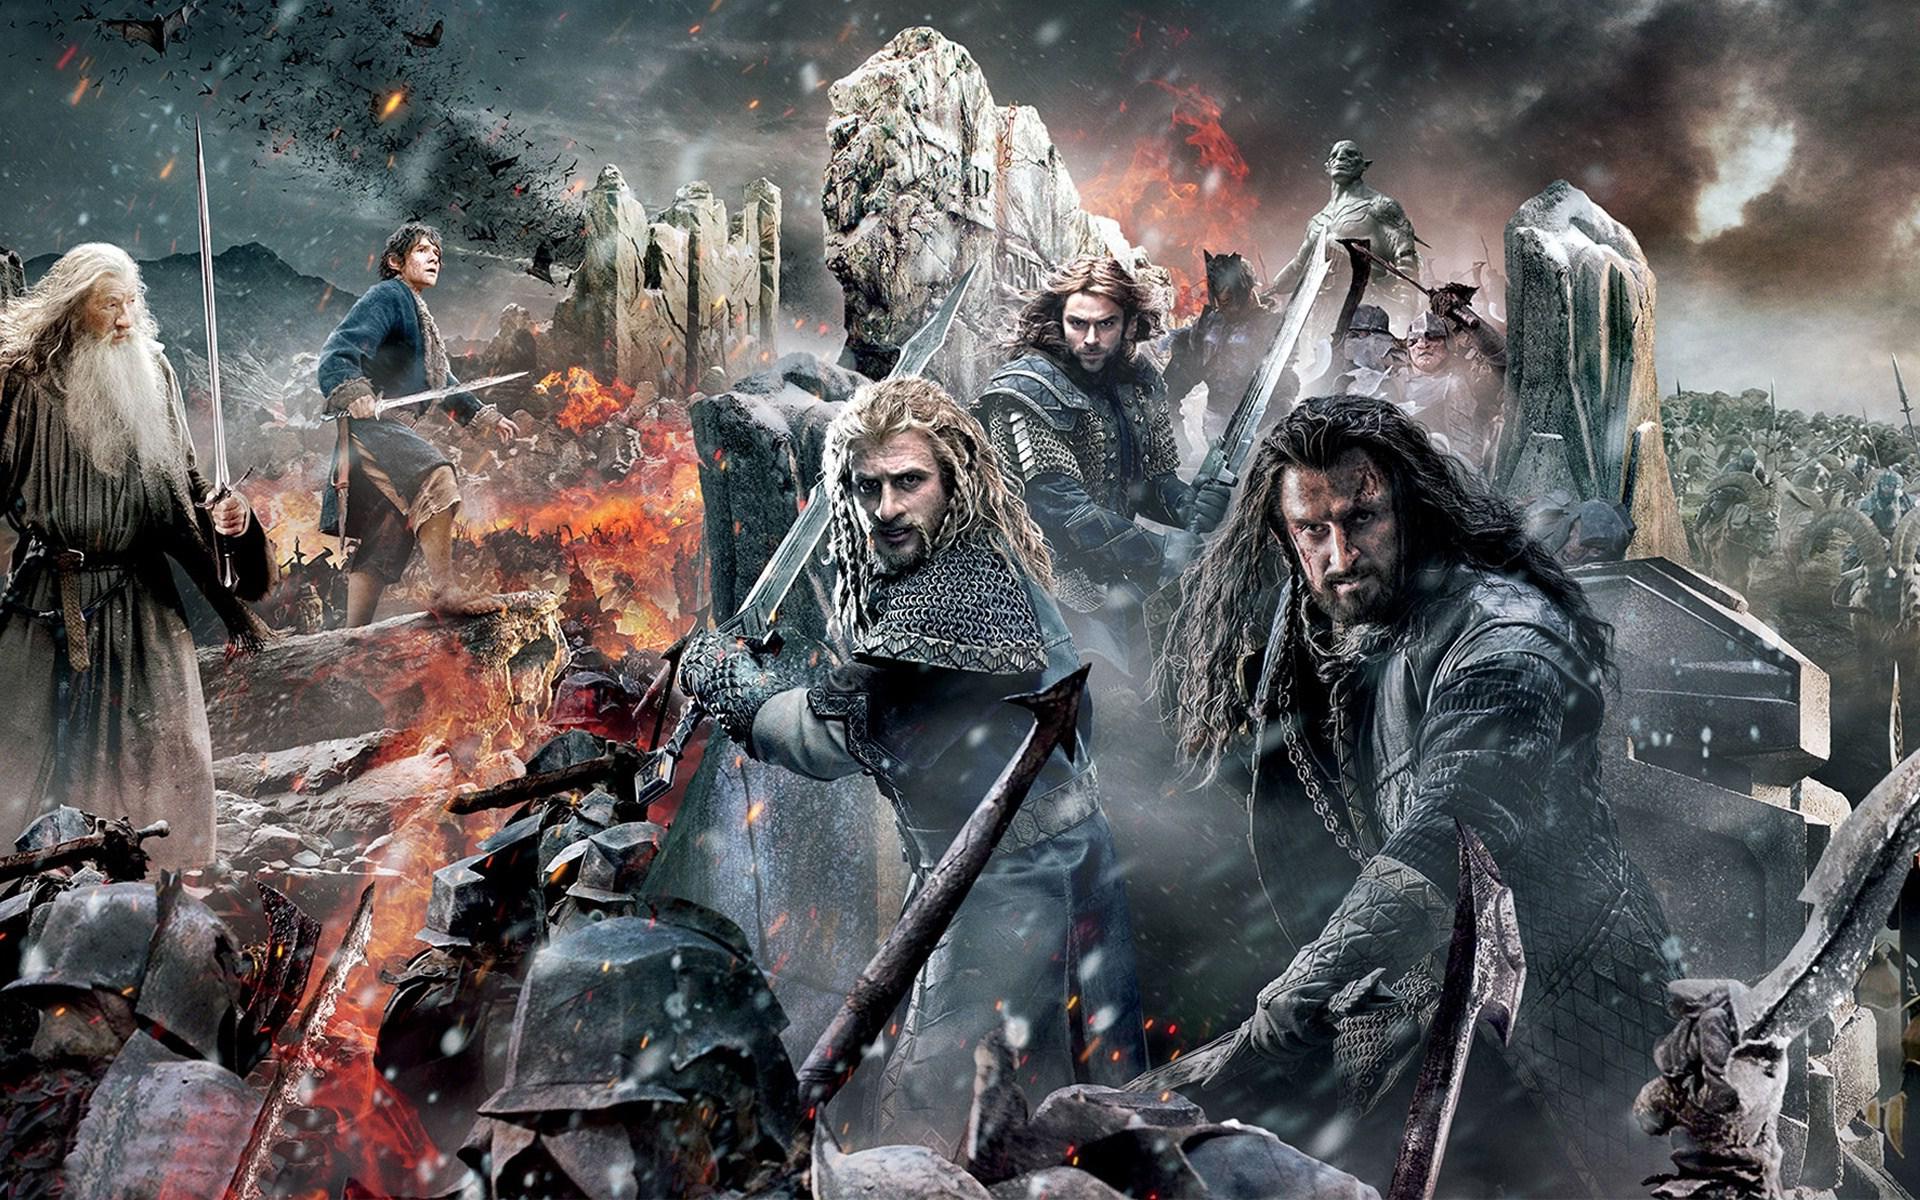 the-hobbit-the-battle-of-the-five-armies-2014-movie-hd